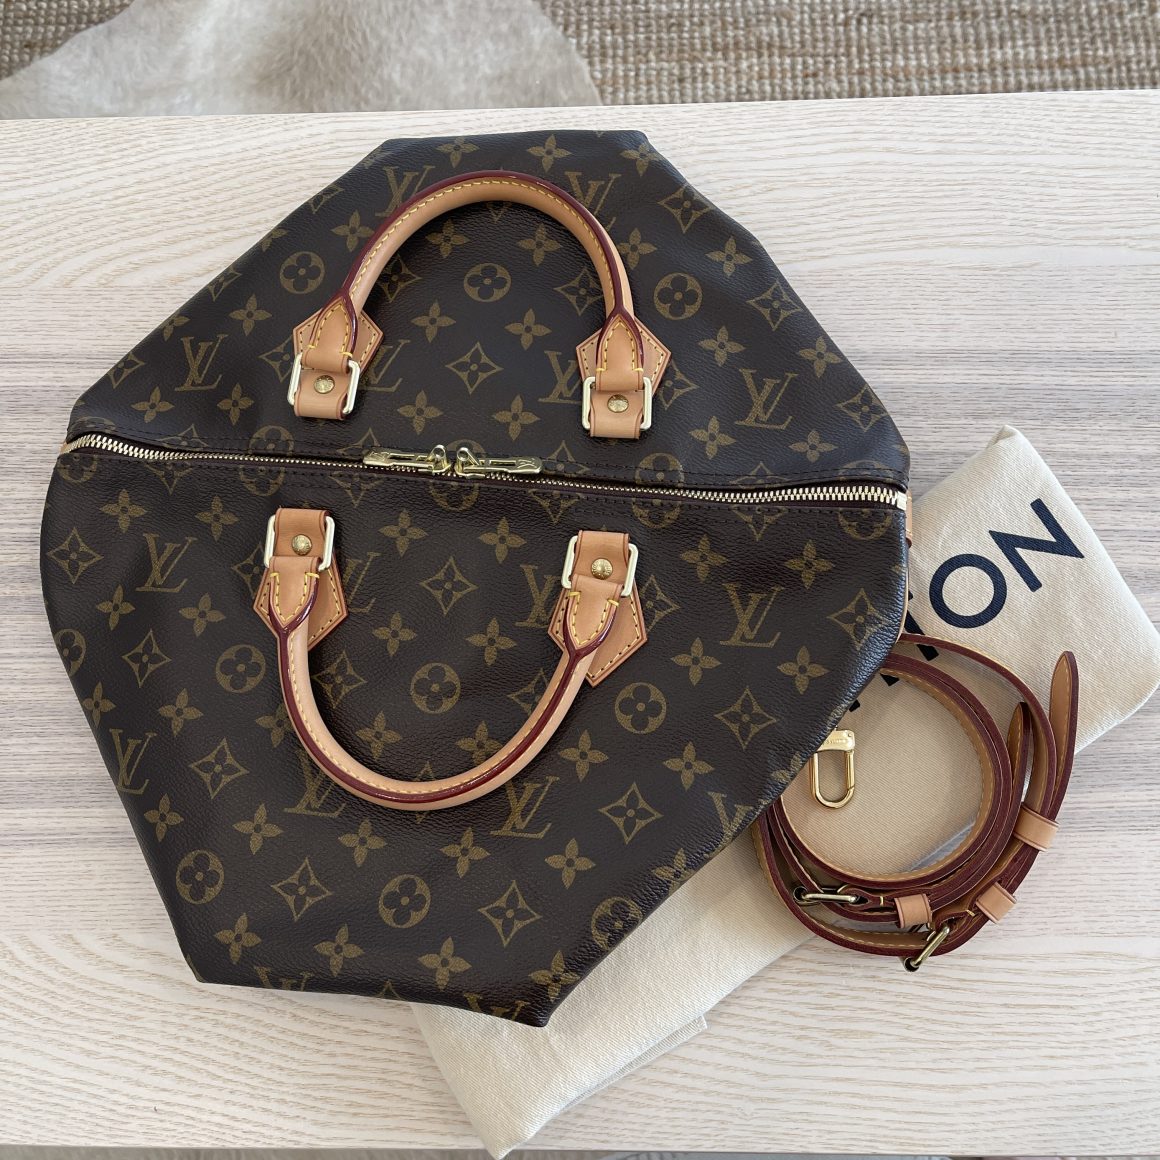 LOUIS VUITTON SPEEDY B 35 REVIEW / PROS & CONS / WIMB / WEAR AND TEAR 